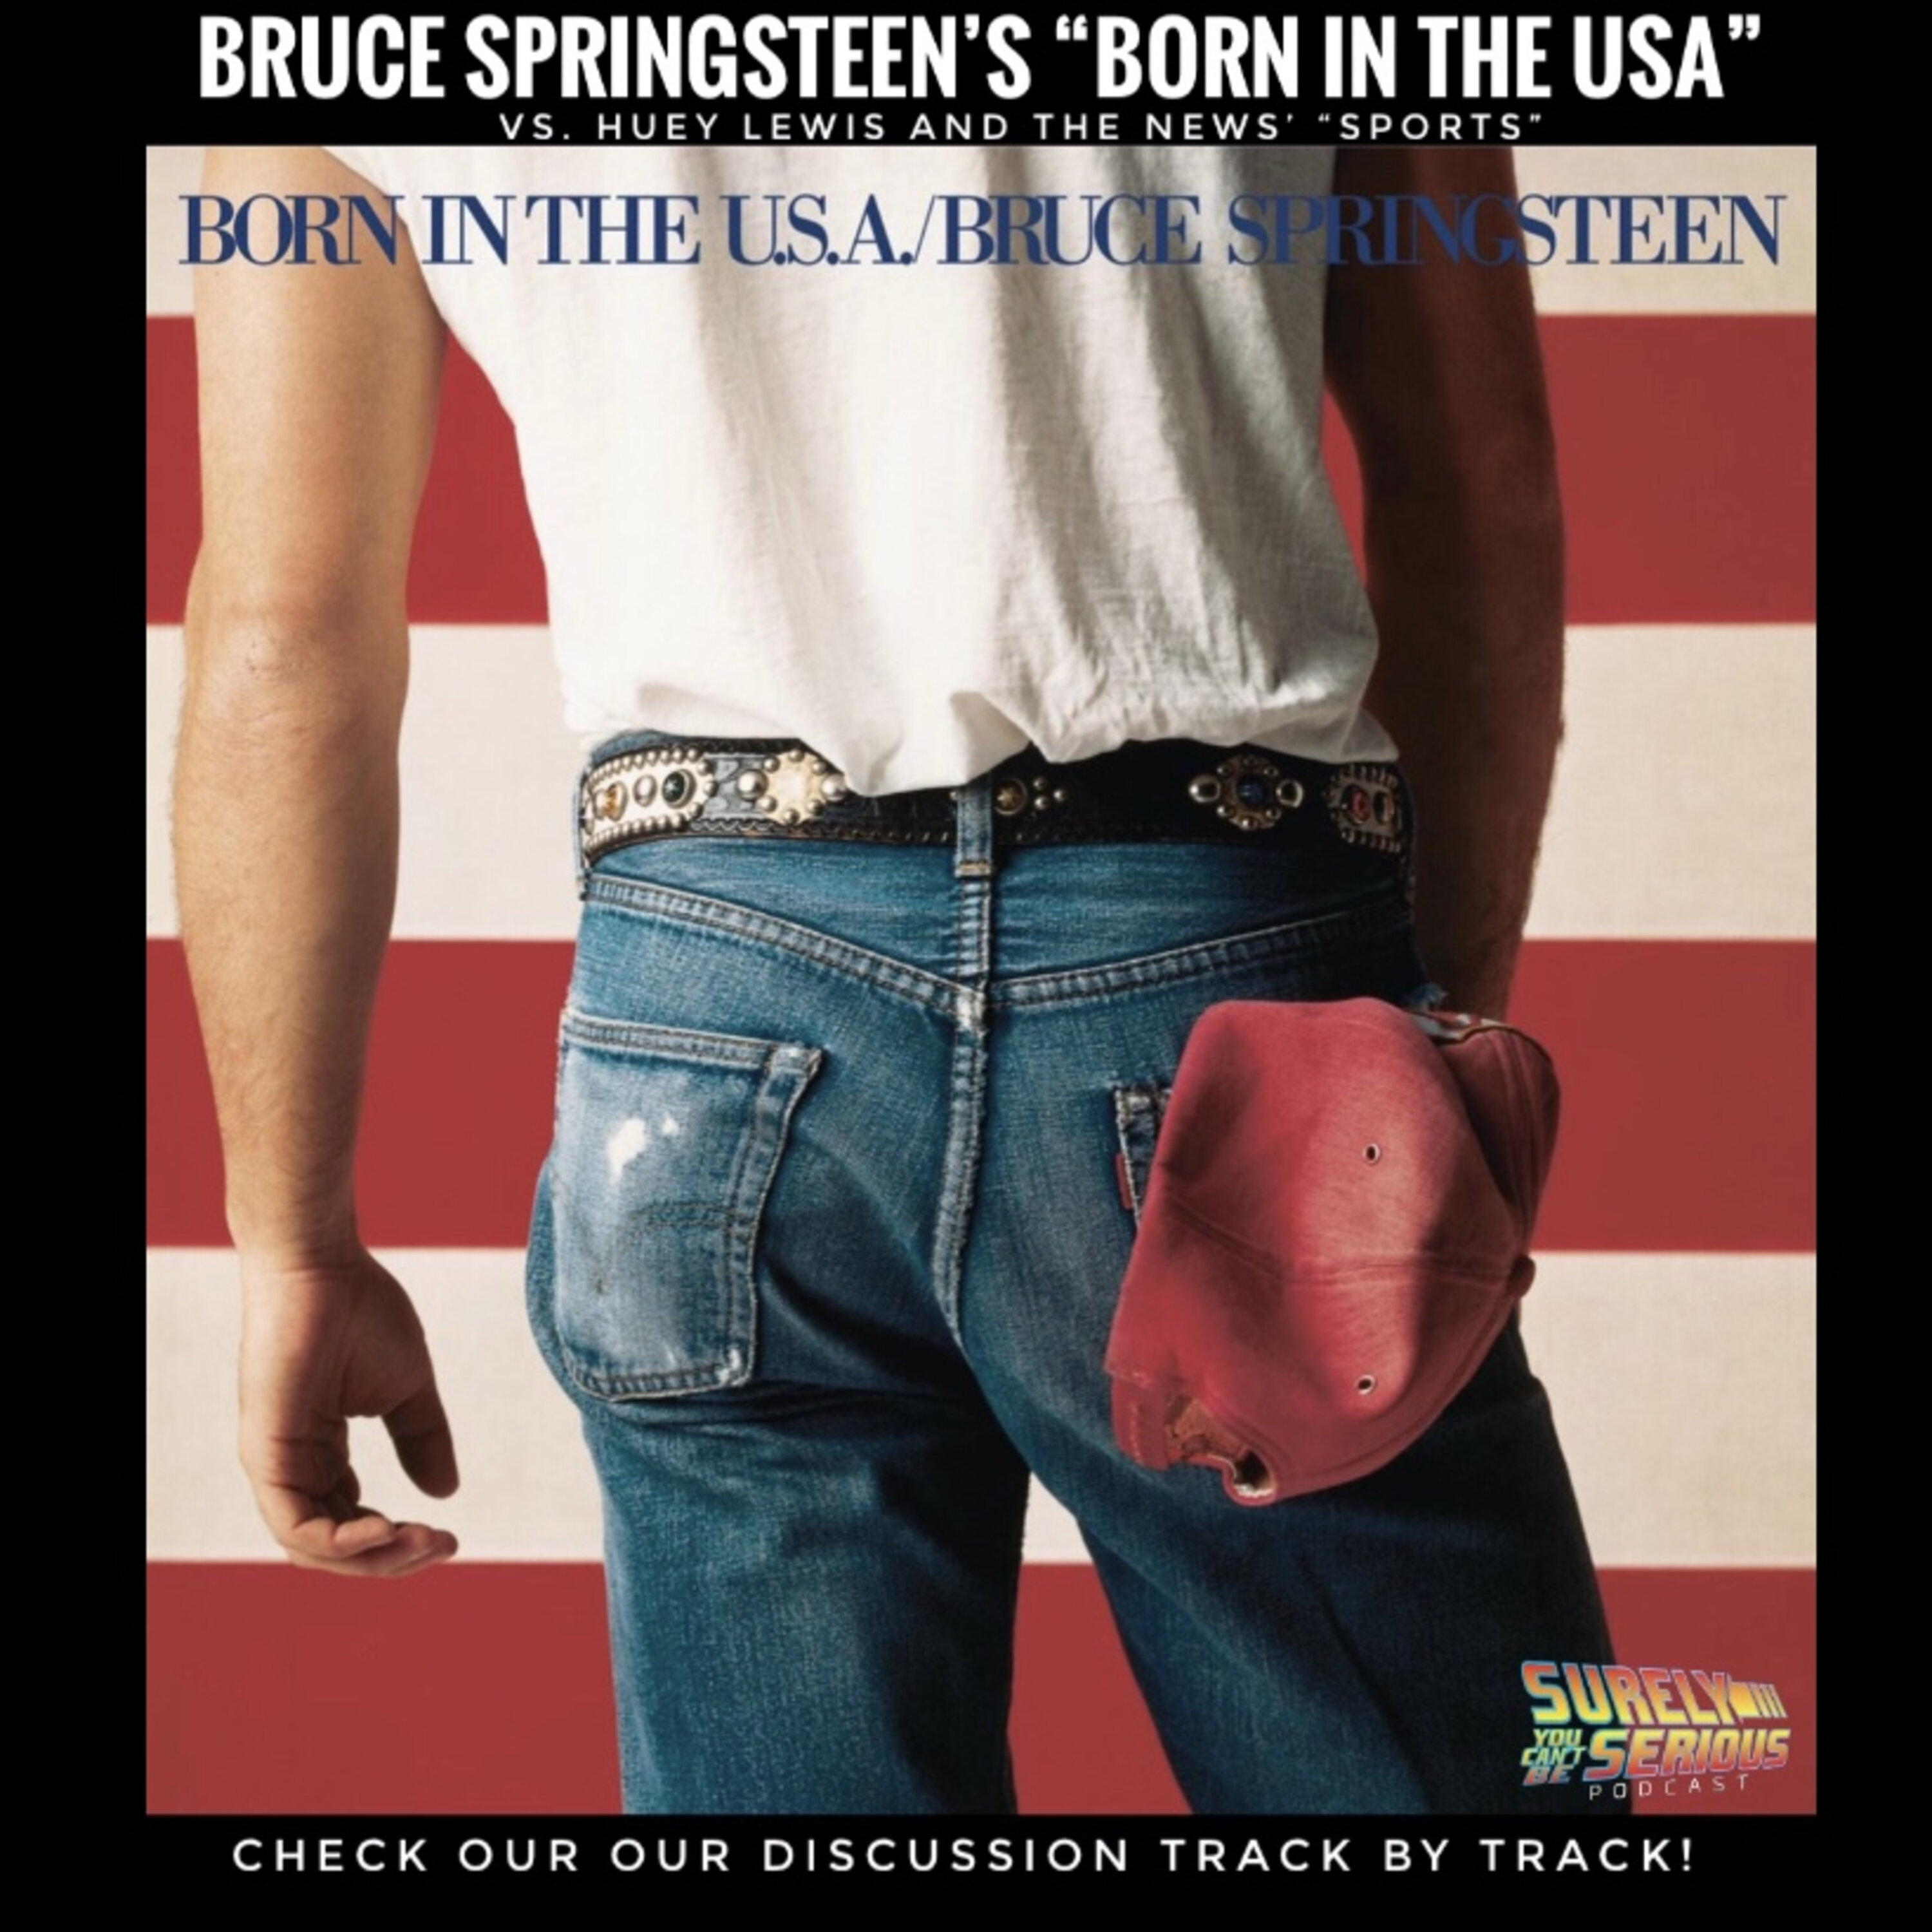 Bruce Springsteen's "Born in the USA" (1984) vs. Huey Lewis "Sports" (1984) Image